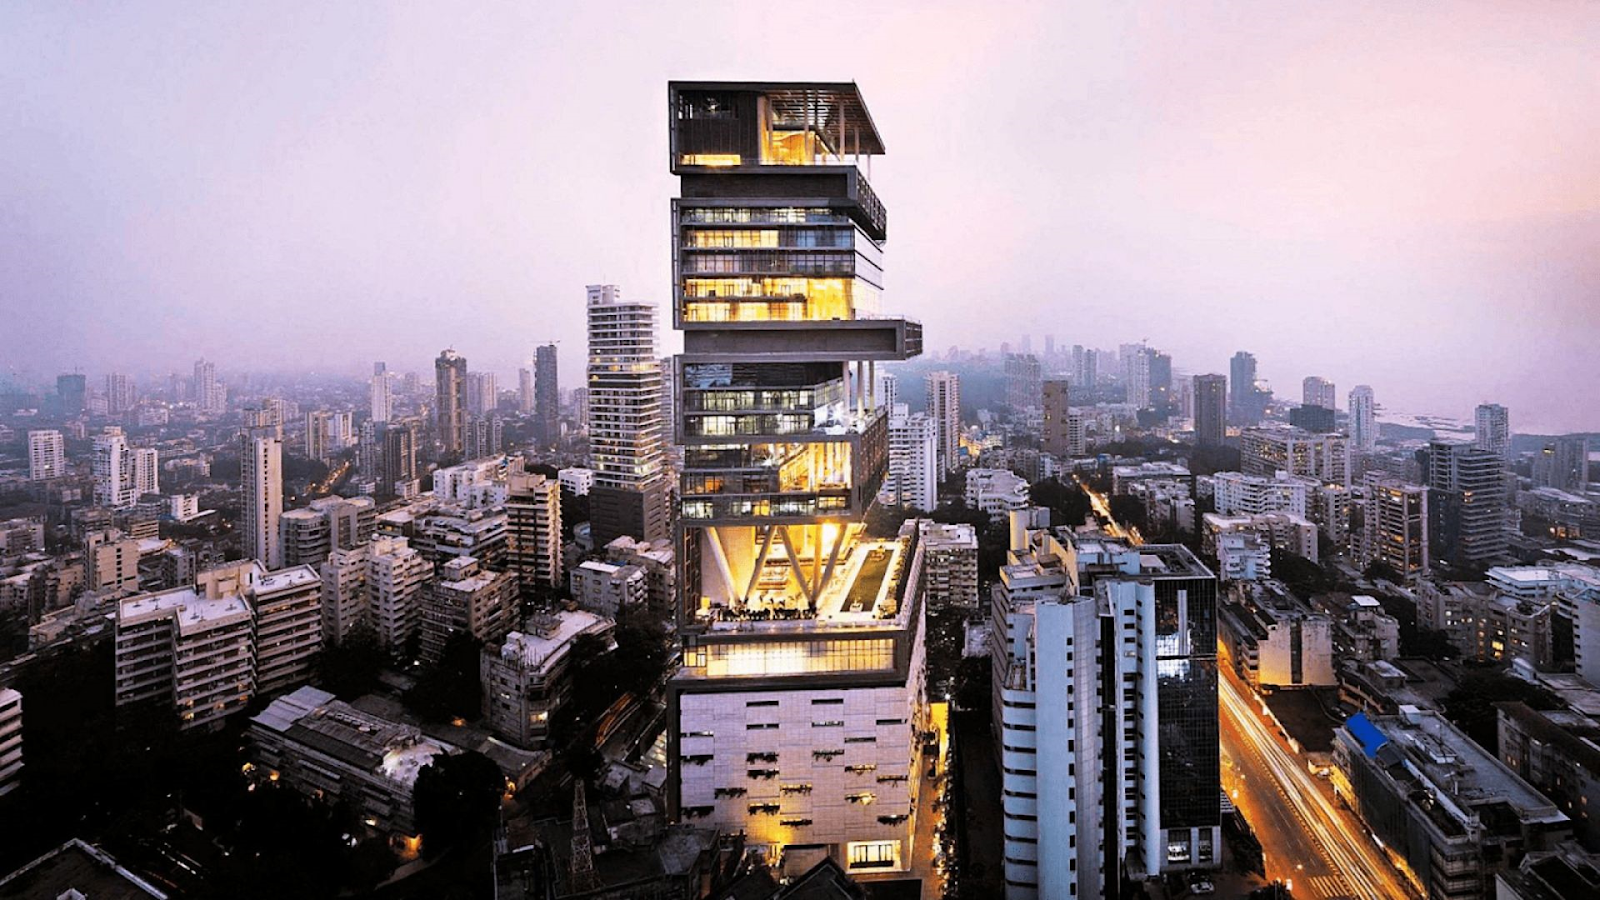 The world's second most expensive residence